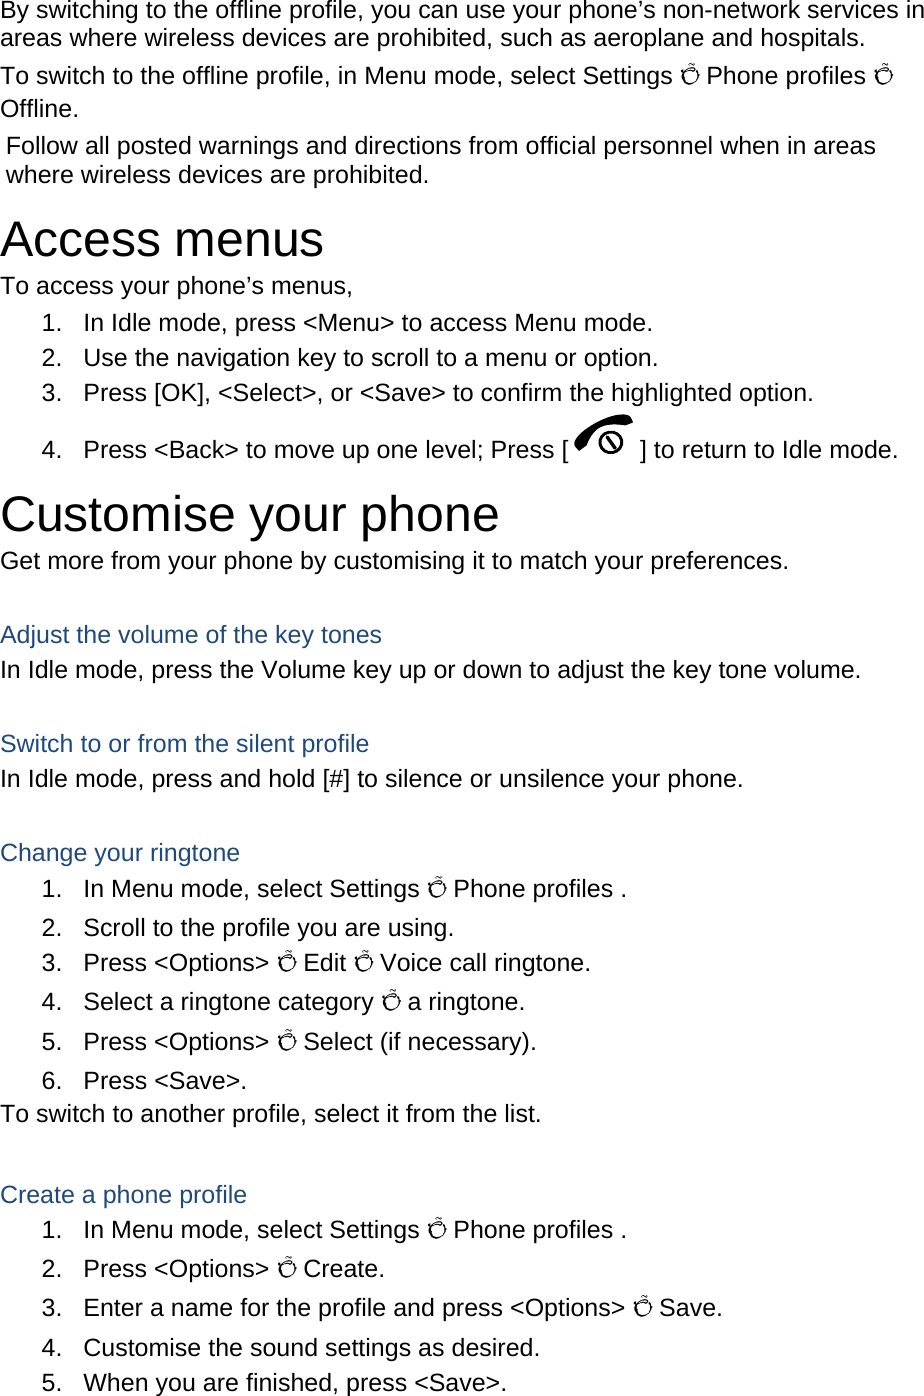   By switching to the offline profile, you can use your phone’s non-network services in areas where wireless devices are prohibited, such as aeroplane and hospitals. To switch to the offline profile, in Menu mode, select Settings Õ Phone profiles Õ Offline. Follow all posted warnings and directions from official personnel when in areas where wireless devices are prohibited. Access menus To access your phone’s menus, 1.  In Idle mode, press &lt;Menu&gt; to access Menu mode. 2.  Use the navigation key to scroll to a menu or option. 3.  Press [OK], &lt;Select&gt;, or &lt;Save&gt; to confirm the highlighted option. 4.  Press &lt;Back&gt; to move up one level; Press [ ] to return to Idle mode. Customise your phone Get more from your phone by customising it to match your preferences.  Adjust the volume of the key tones In Idle mode, press the Volume key up or down to adjust the key tone volume.  Switch to or from the silent profile In Idle mode, press and hold [#] to silence or unsilence your phone.  Change your ringtone 1.  In Menu mode, select Settings Õ Phone profiles . 2.  Scroll to the profile you are using. 3. Press &lt;Options&gt; Õ Edit Õ Voice call ringtone. 4.  Select a ringtone category Õ a ringtone. 5. Press &lt;Options&gt; Õ Select (if necessary). 6. Press &lt;Save&gt;. To switch to another profile, select it from the list.  Create a phone profile 1.  In Menu mode, select Settings Õ Phone profiles . 2. Press &lt;Options&gt; Õ Create. 3.  Enter a name for the profile and press &lt;Options&gt; Õ Save. 4.  Customise the sound settings as desired. 5.  When you are finished, press &lt;Save&gt;. 